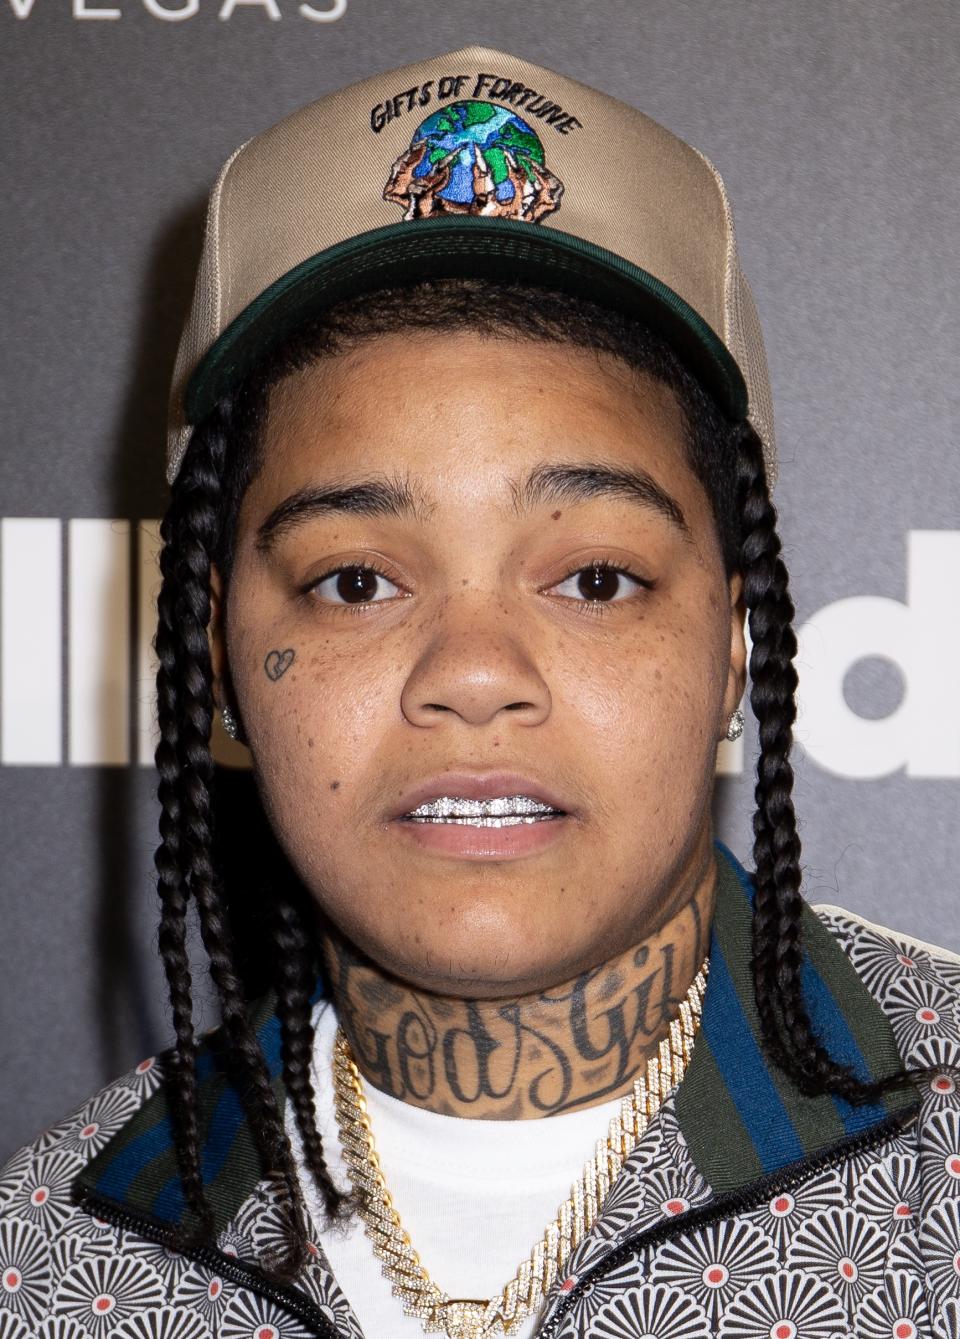 Young M.A posing for picture.